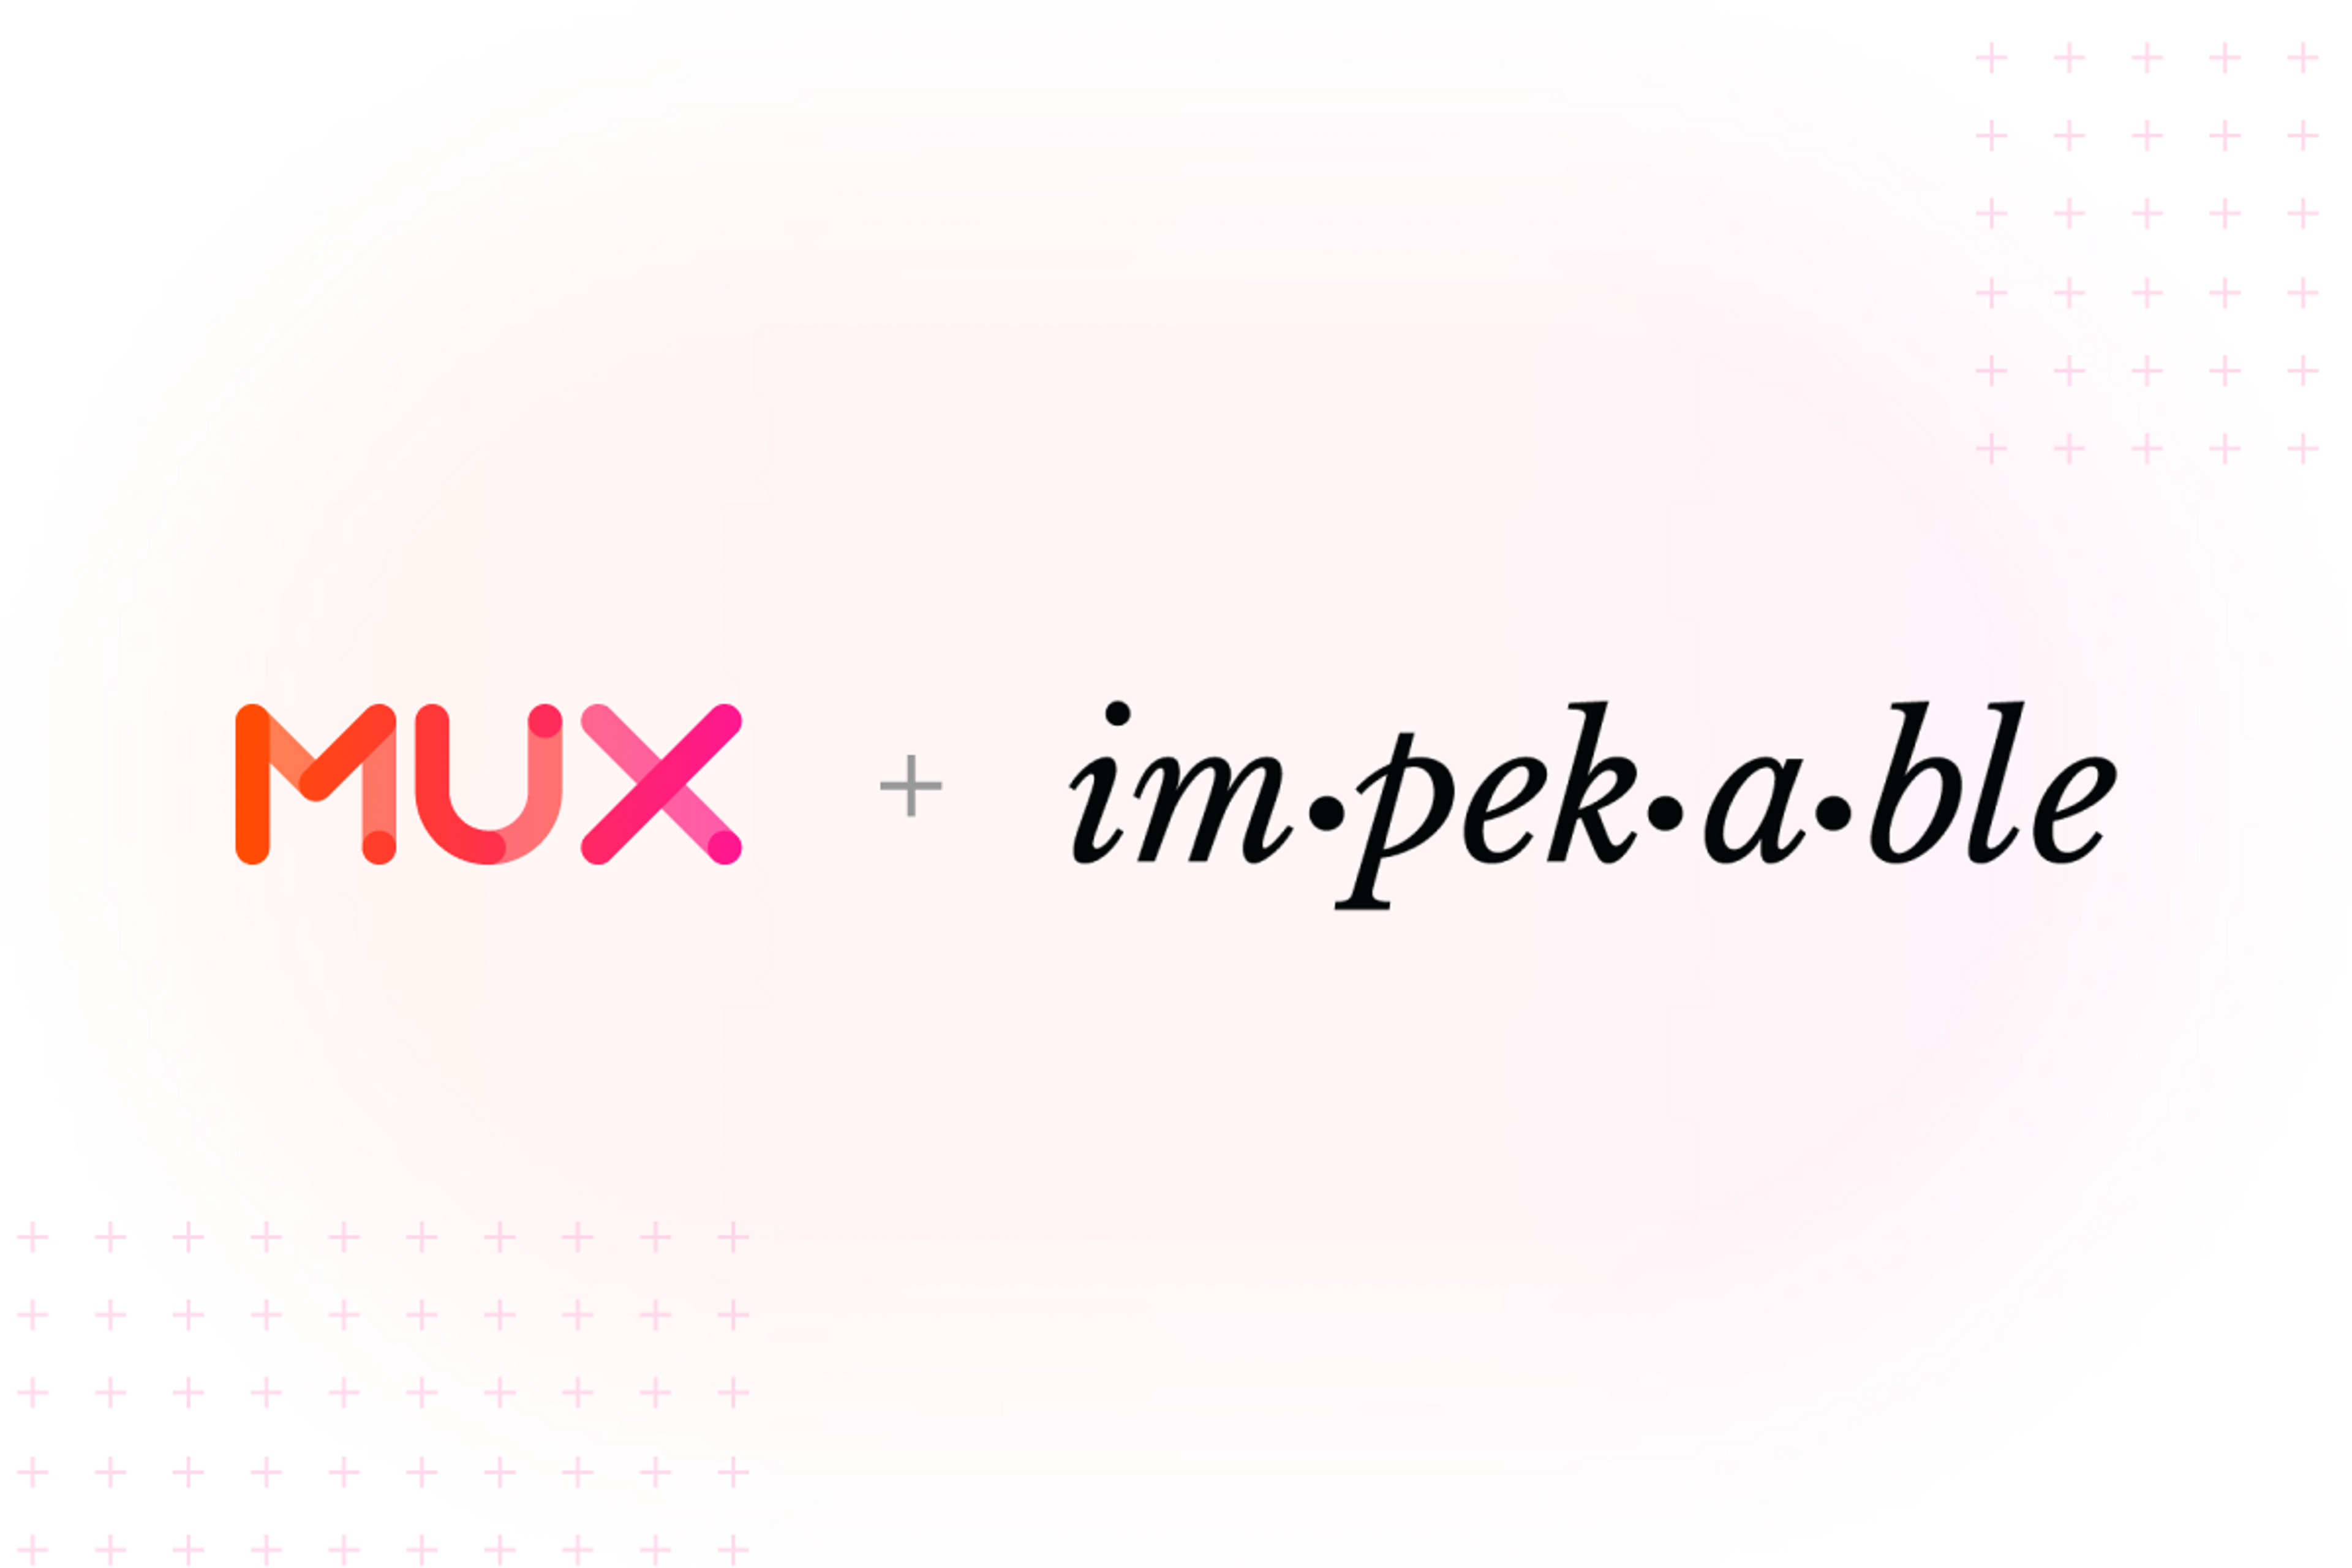 an image of mux and impekable logos on a pink and white background